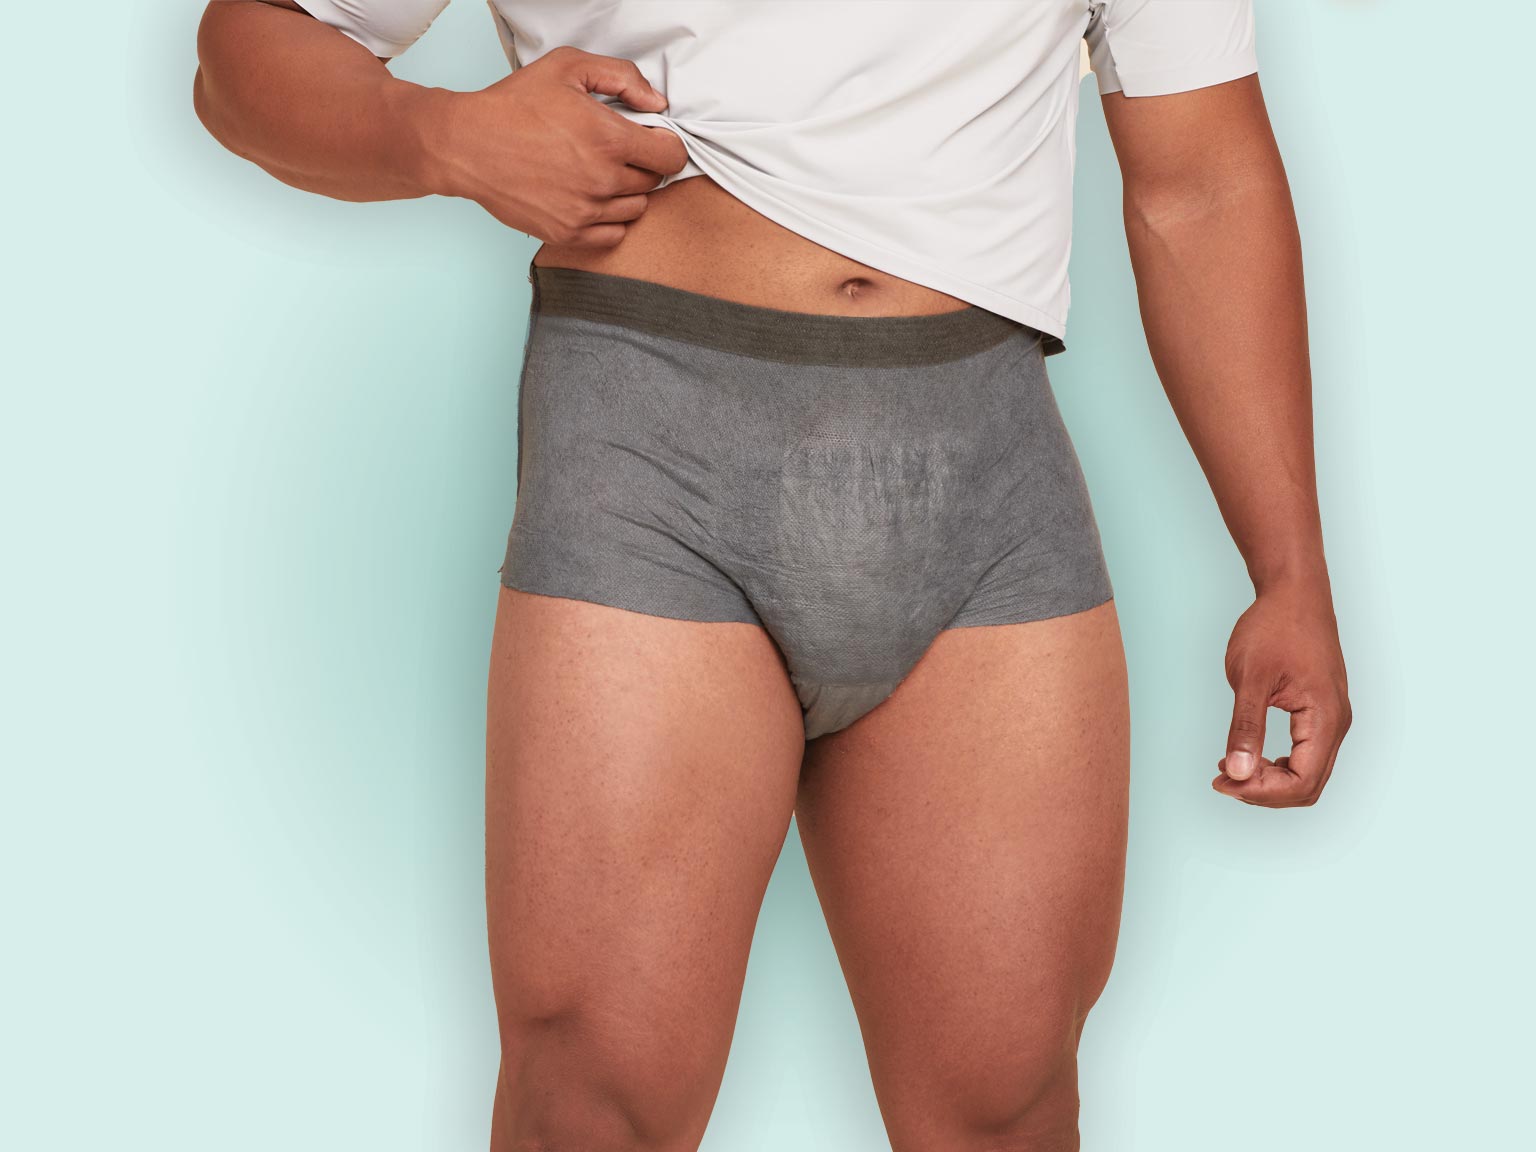 The smart underwear designed to shield against mobile phone